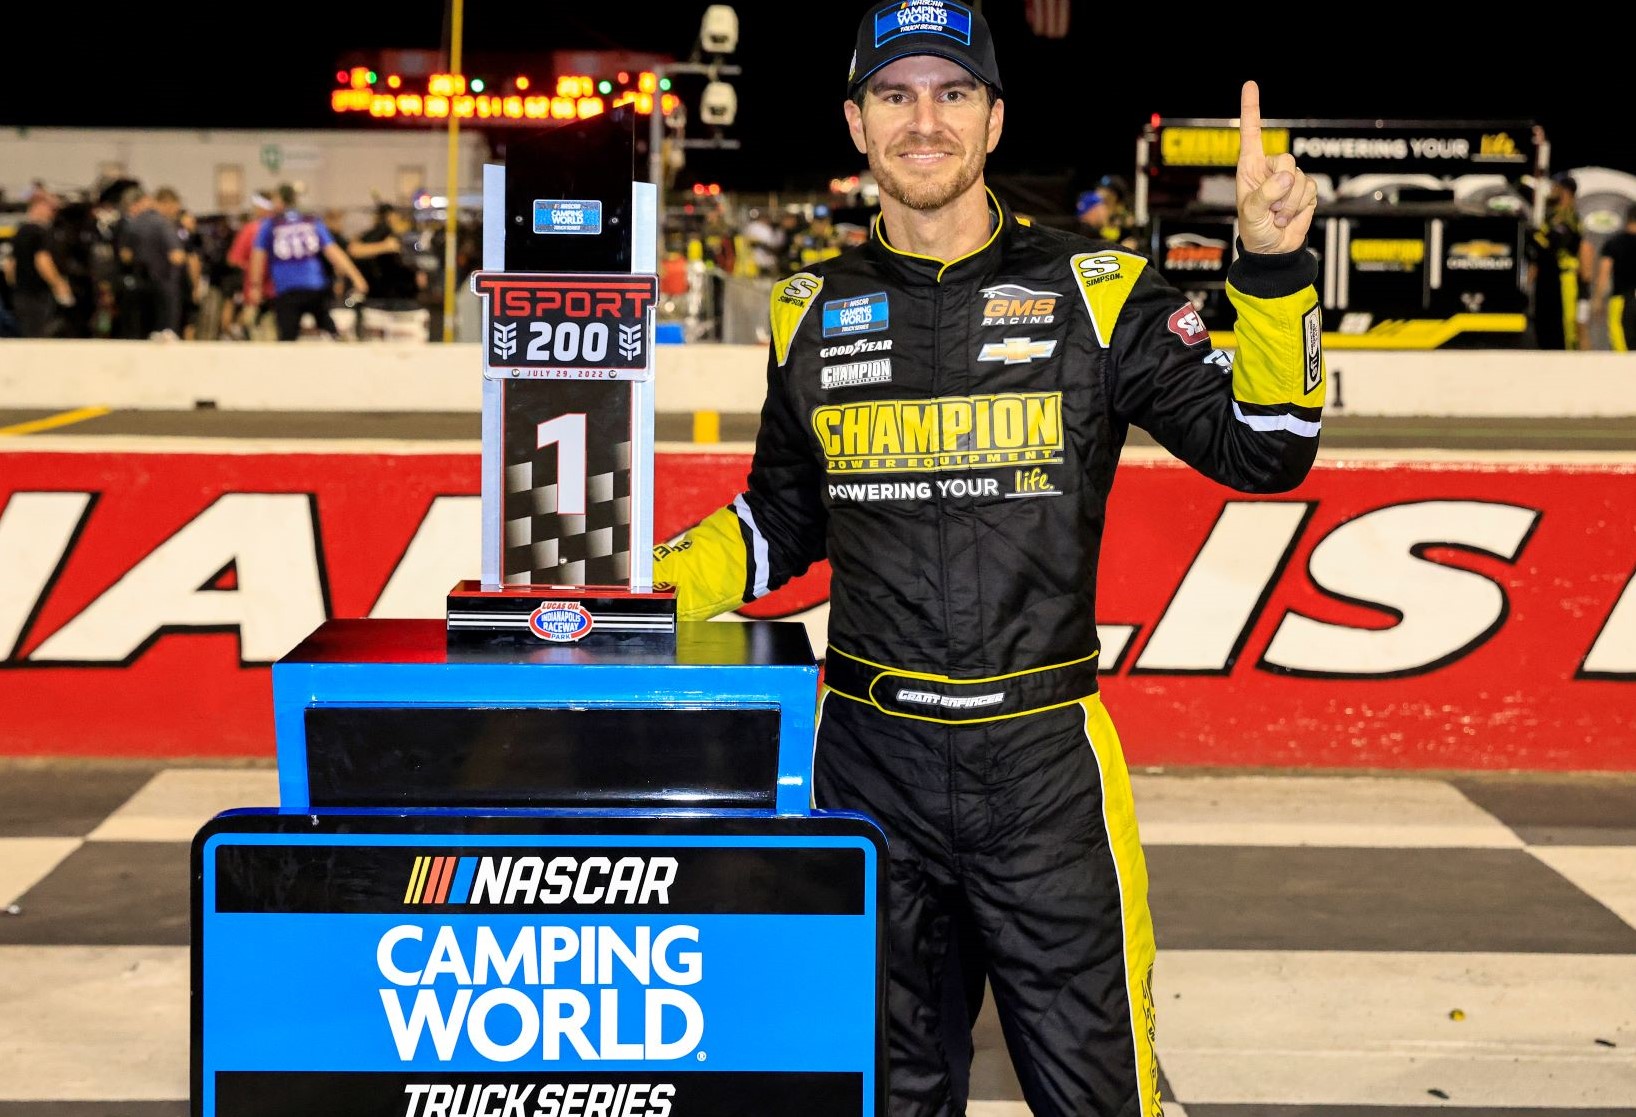 Grant Enfinger wins first 2022 Truck race in Indianapolis